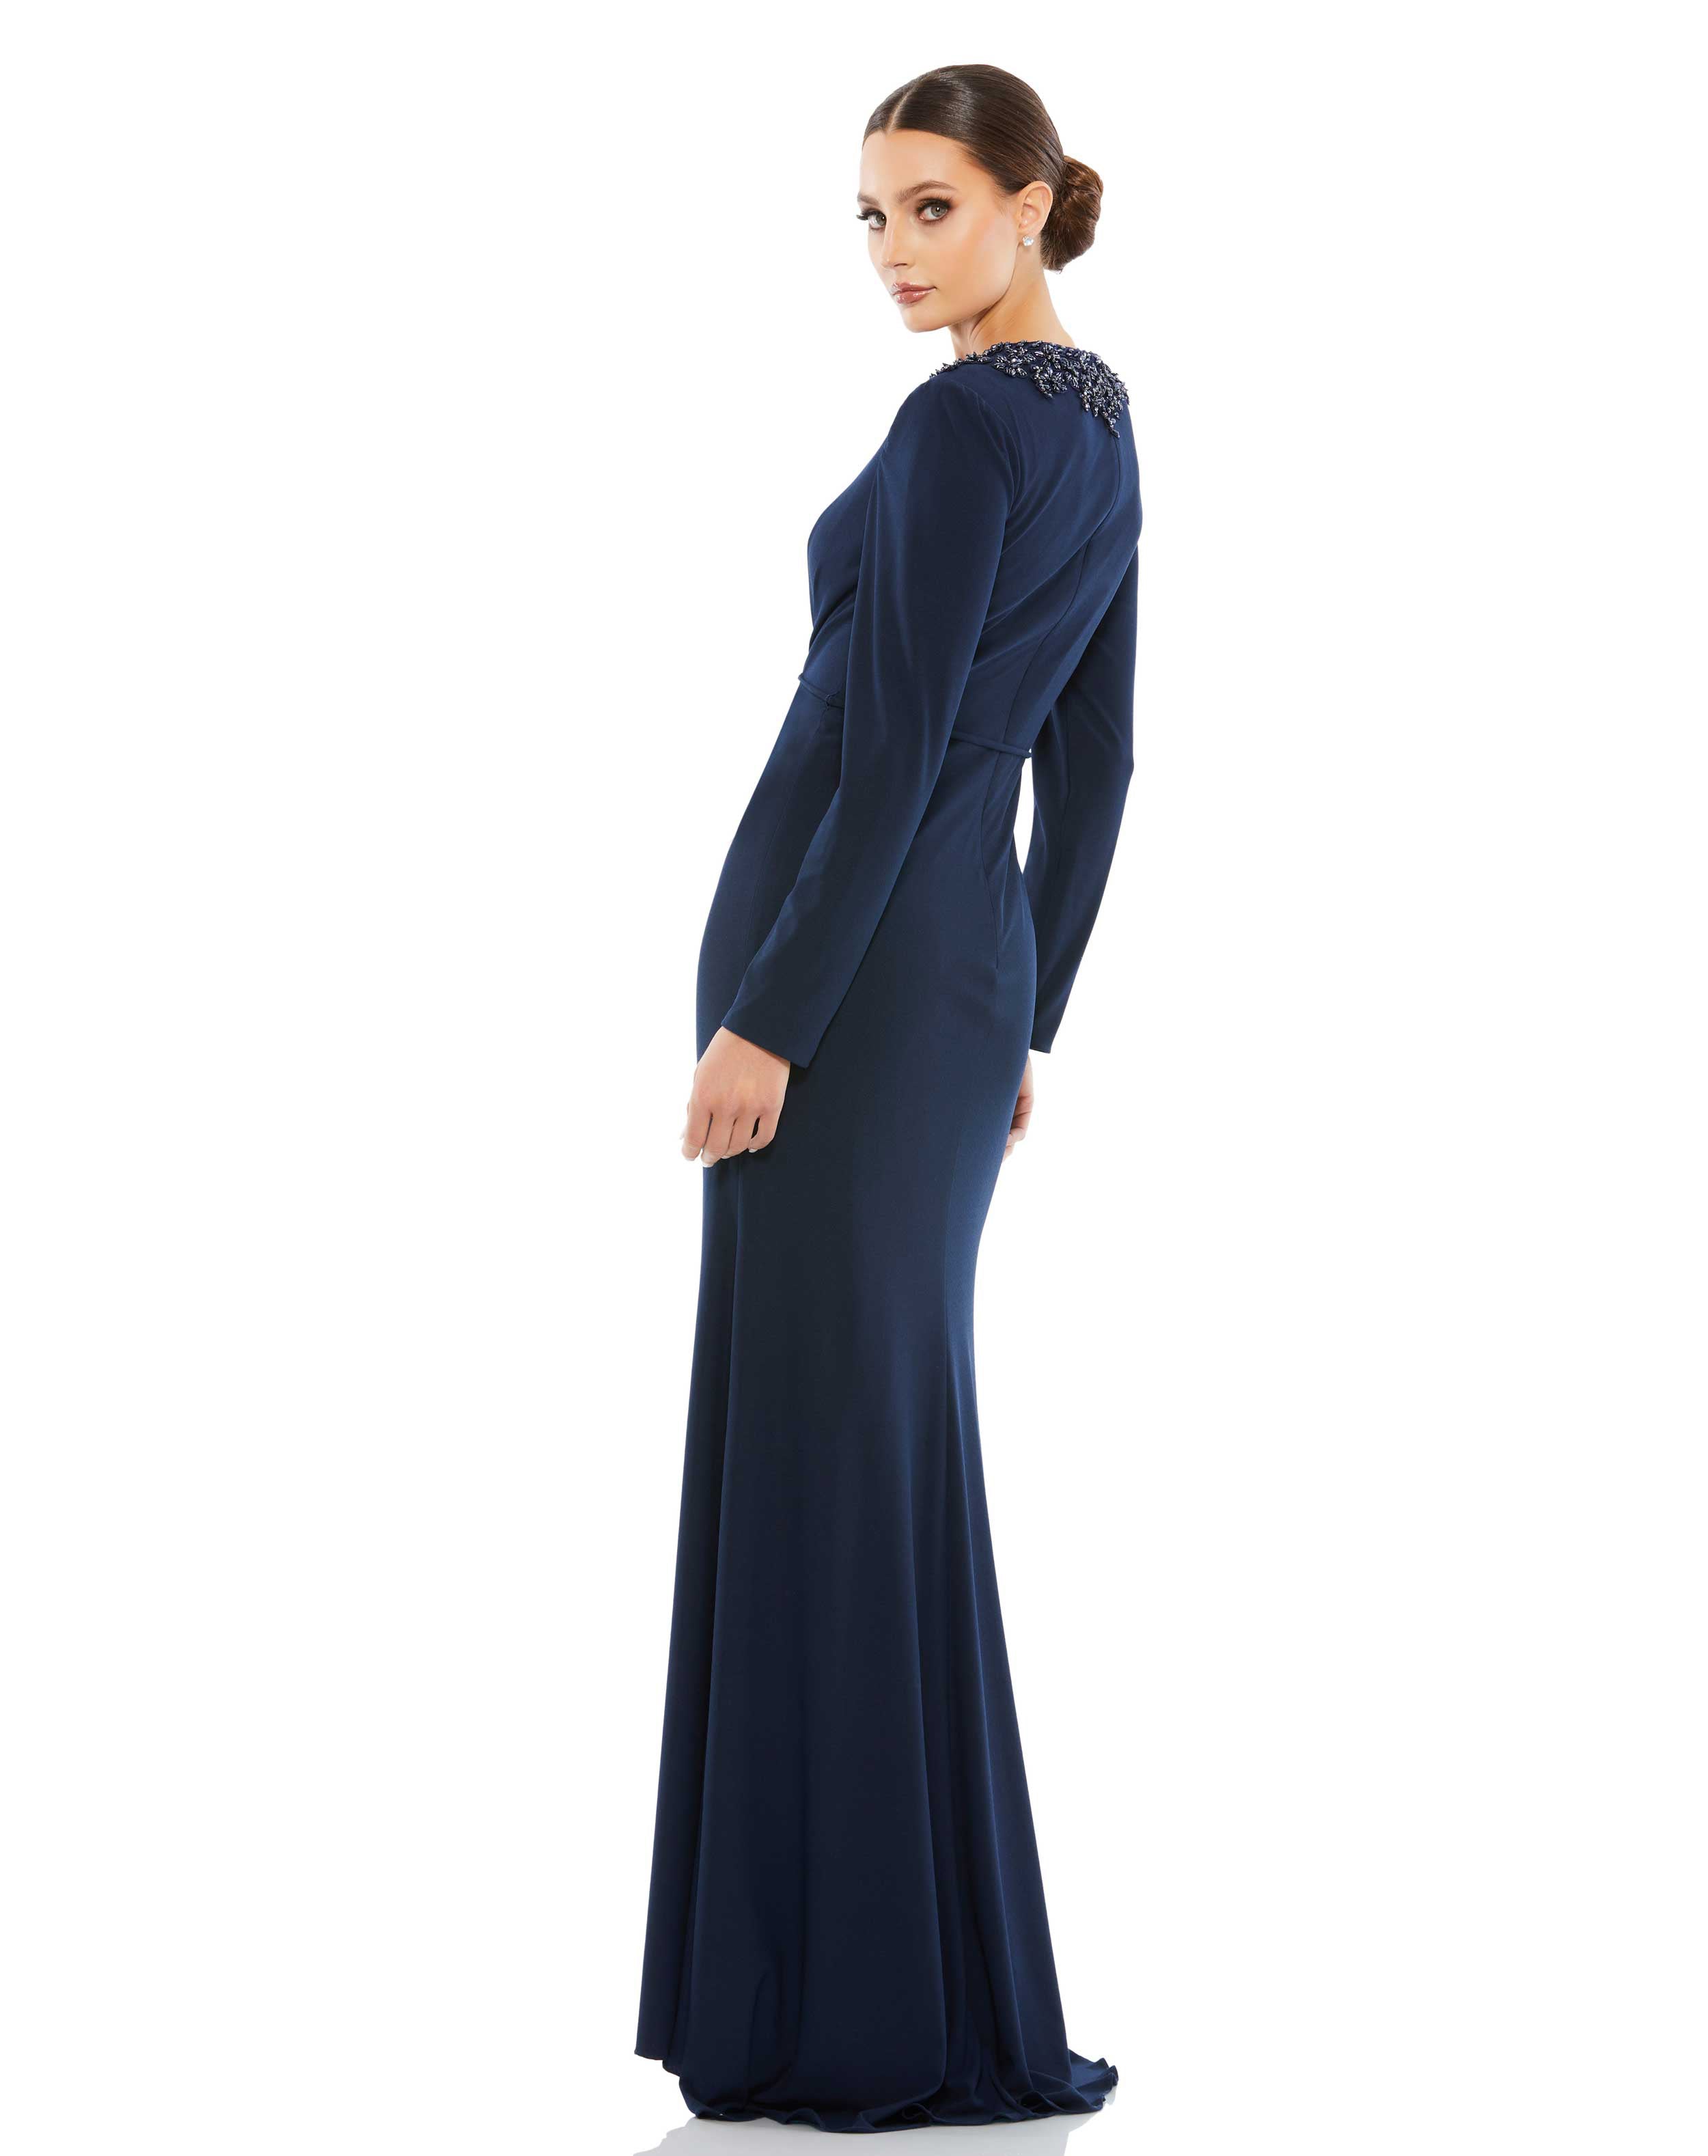 Beaded High Neck Front Twist Long Sleeve Trumpet Gown